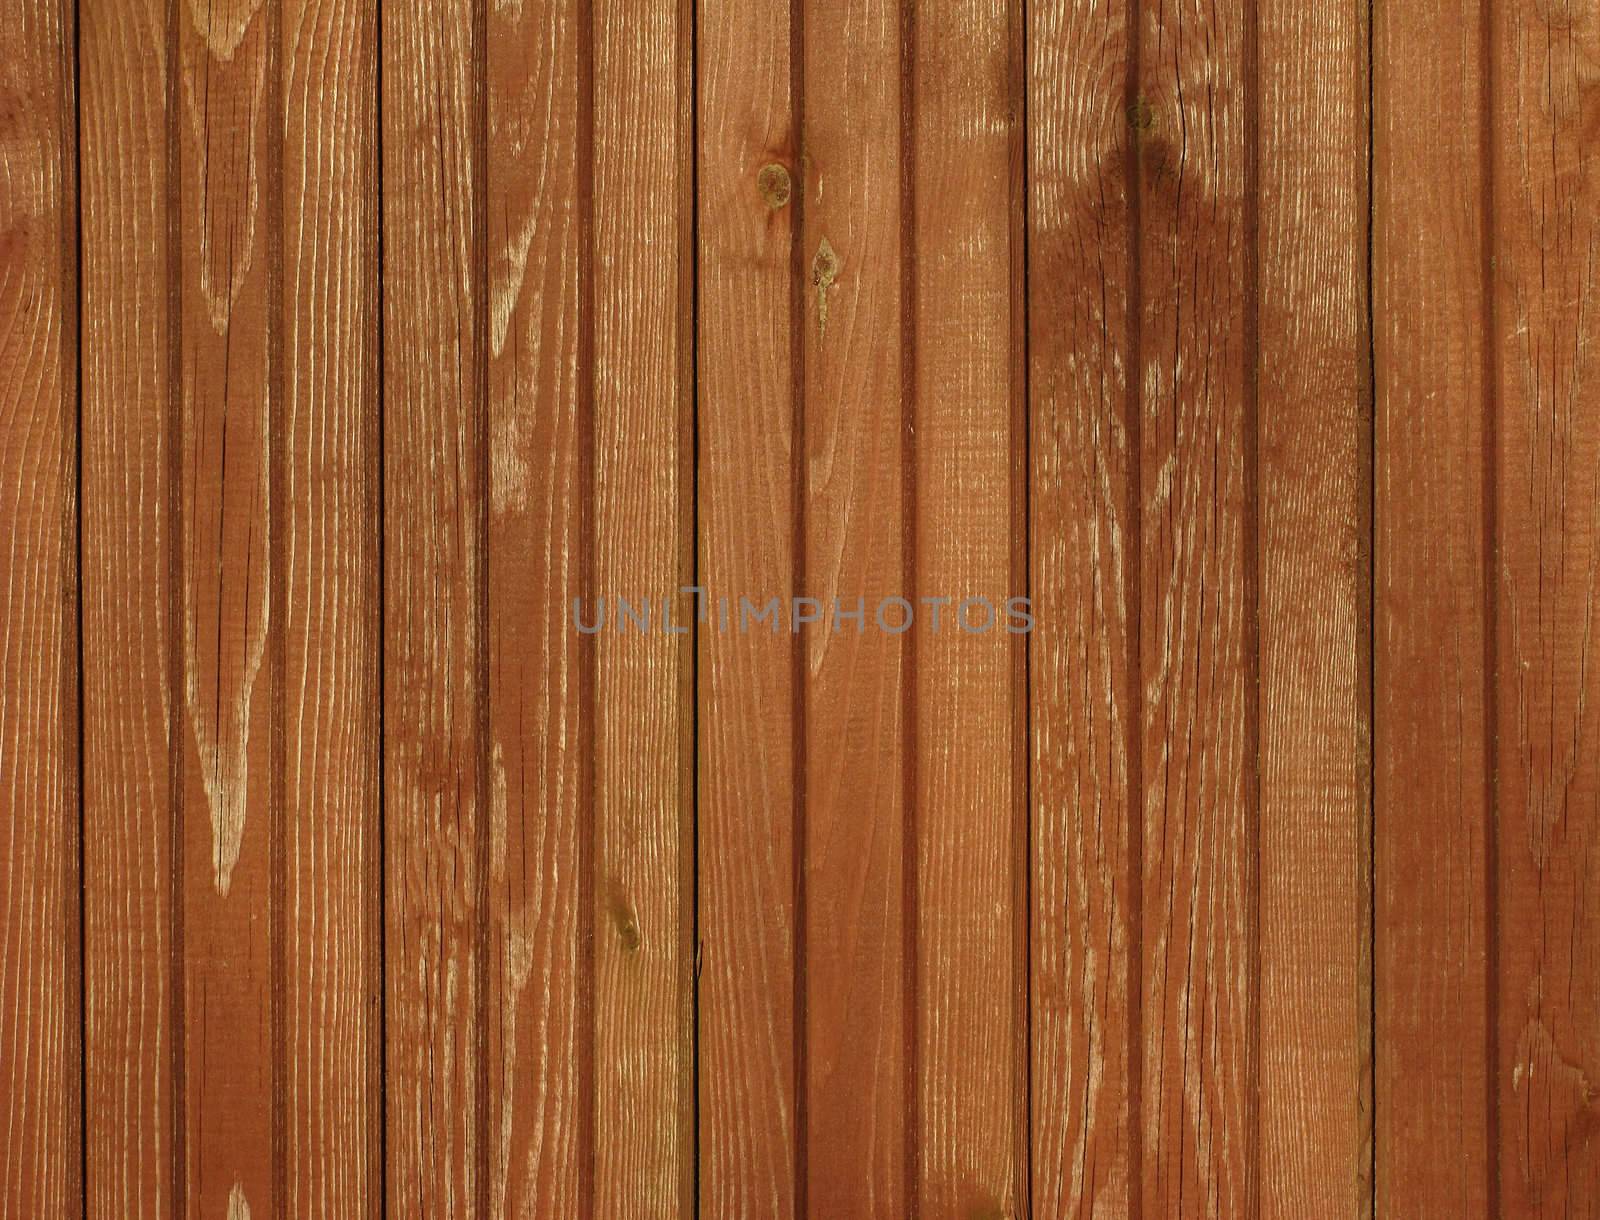 Fragment of natural wooden brown colored fence